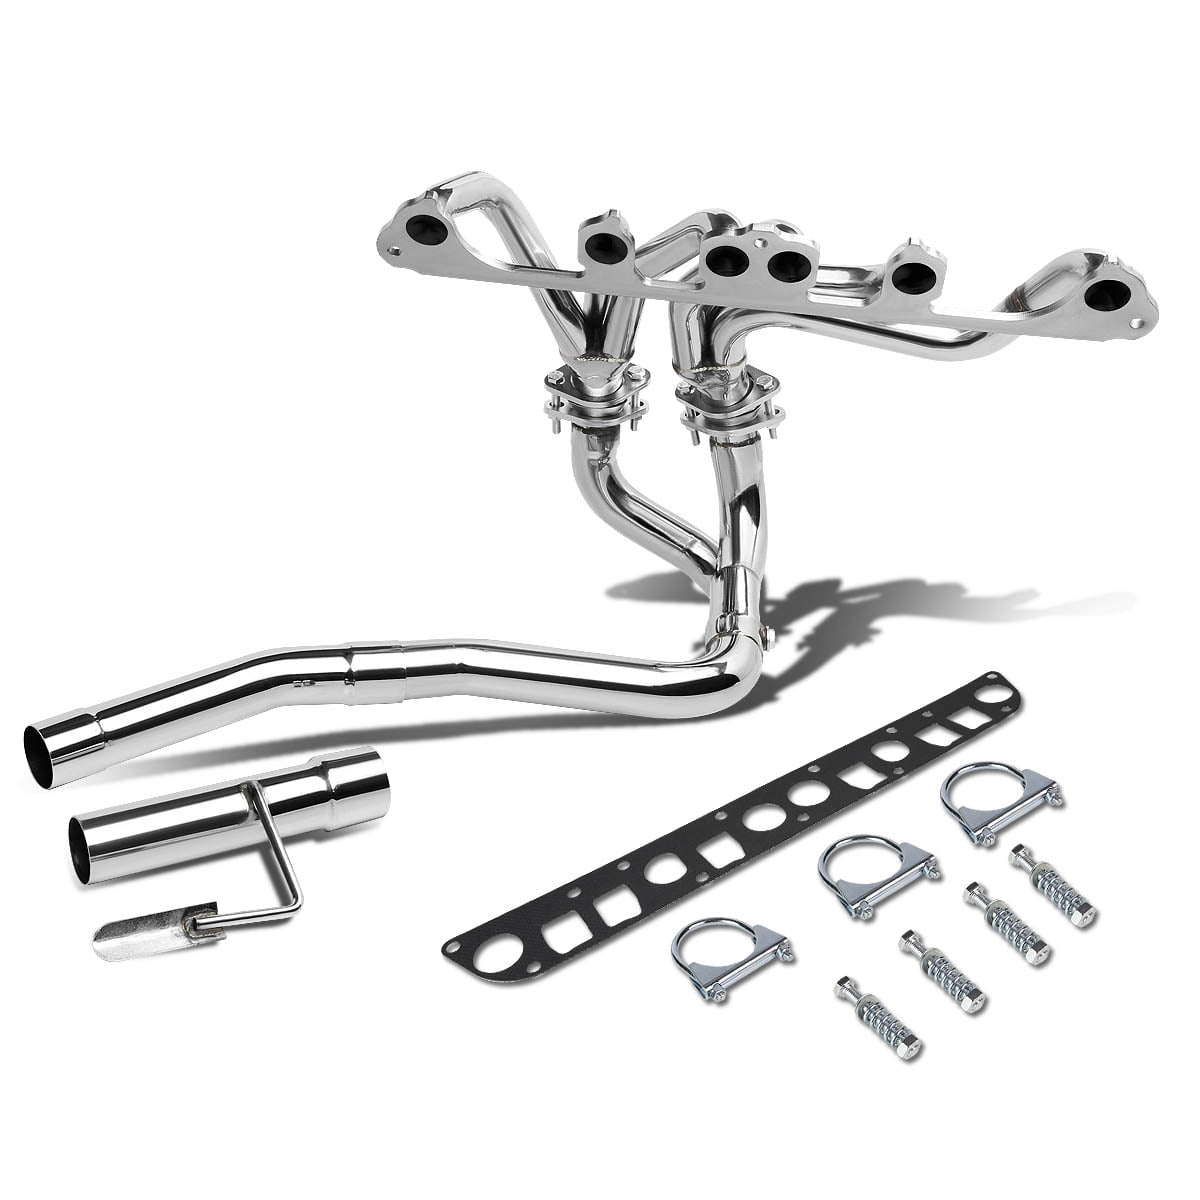 TUPARTS Exhaust System HDSJC9140YP Stainless Steel Exhaust Manifold Kit Replacement for 1991-1999 J-eep Cherokee 